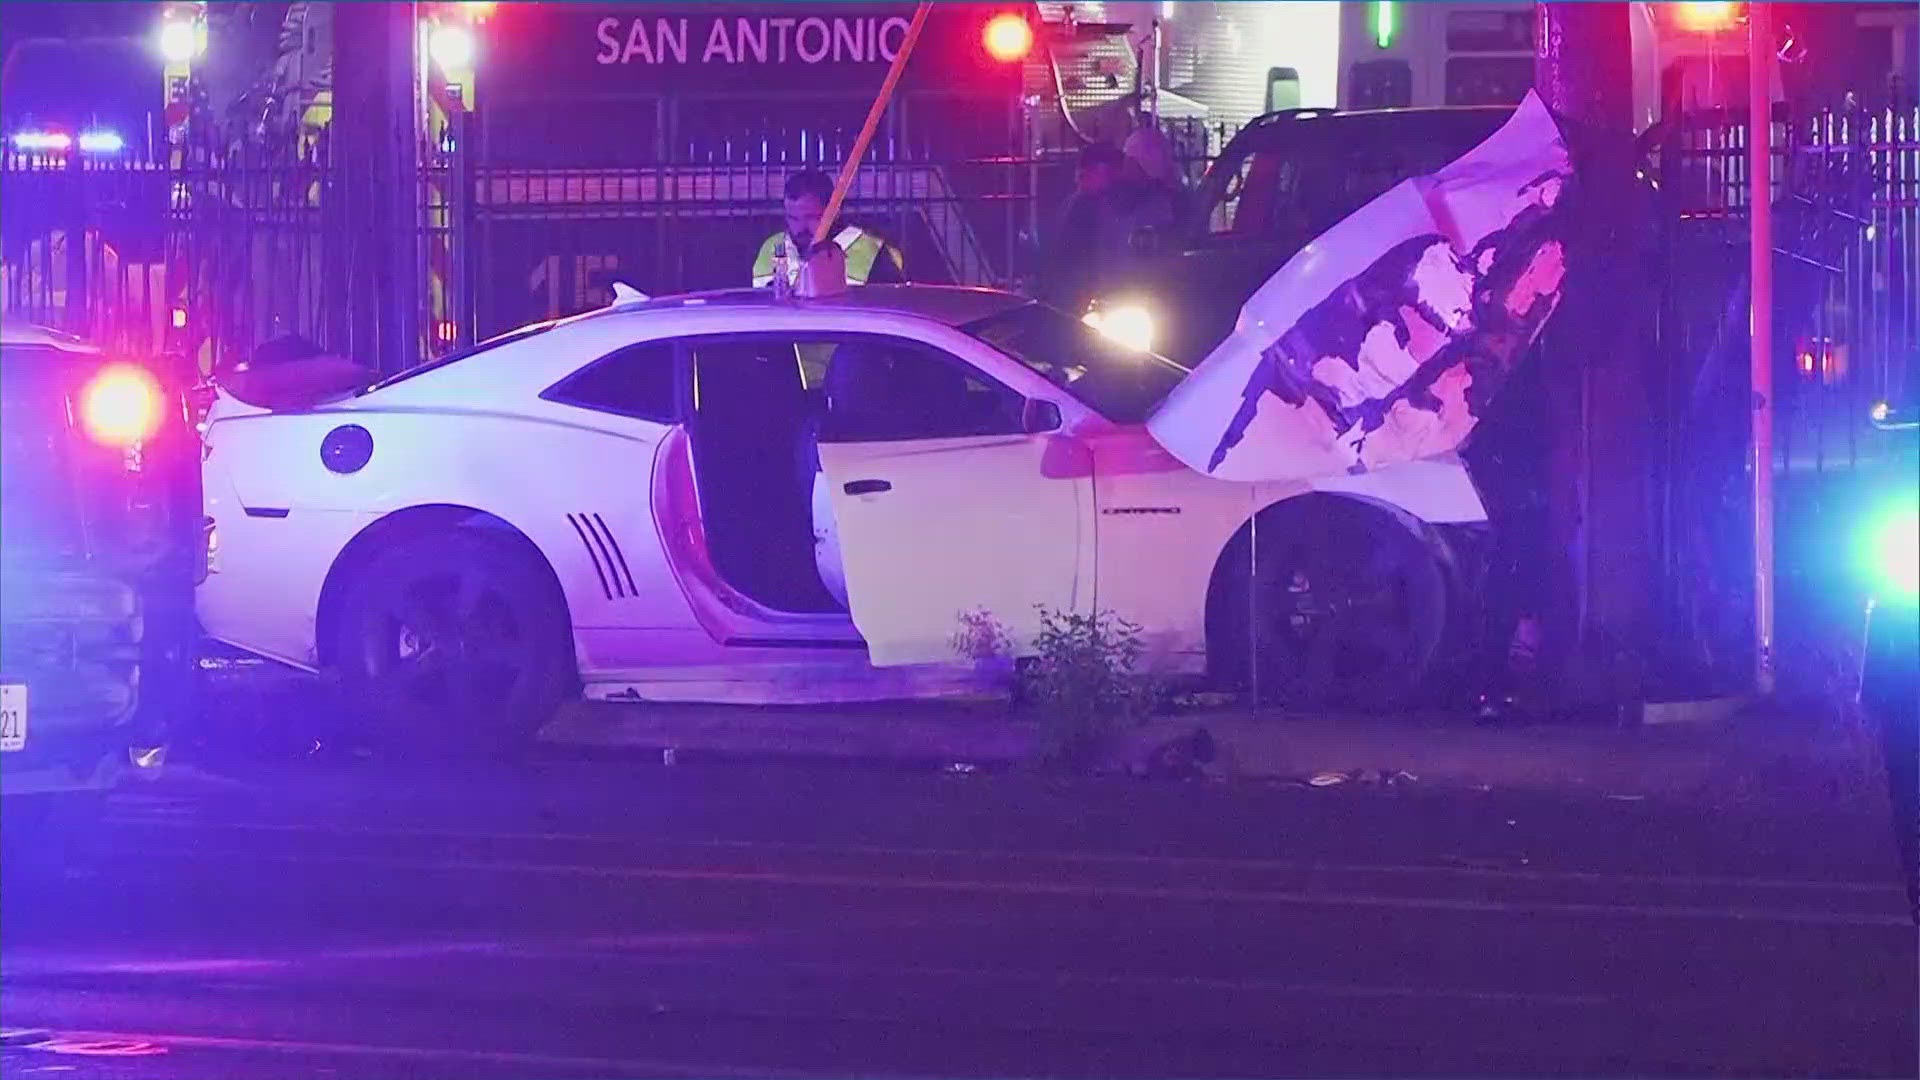 According to police, witnesses reported the Camero as speeding moments before the crash.